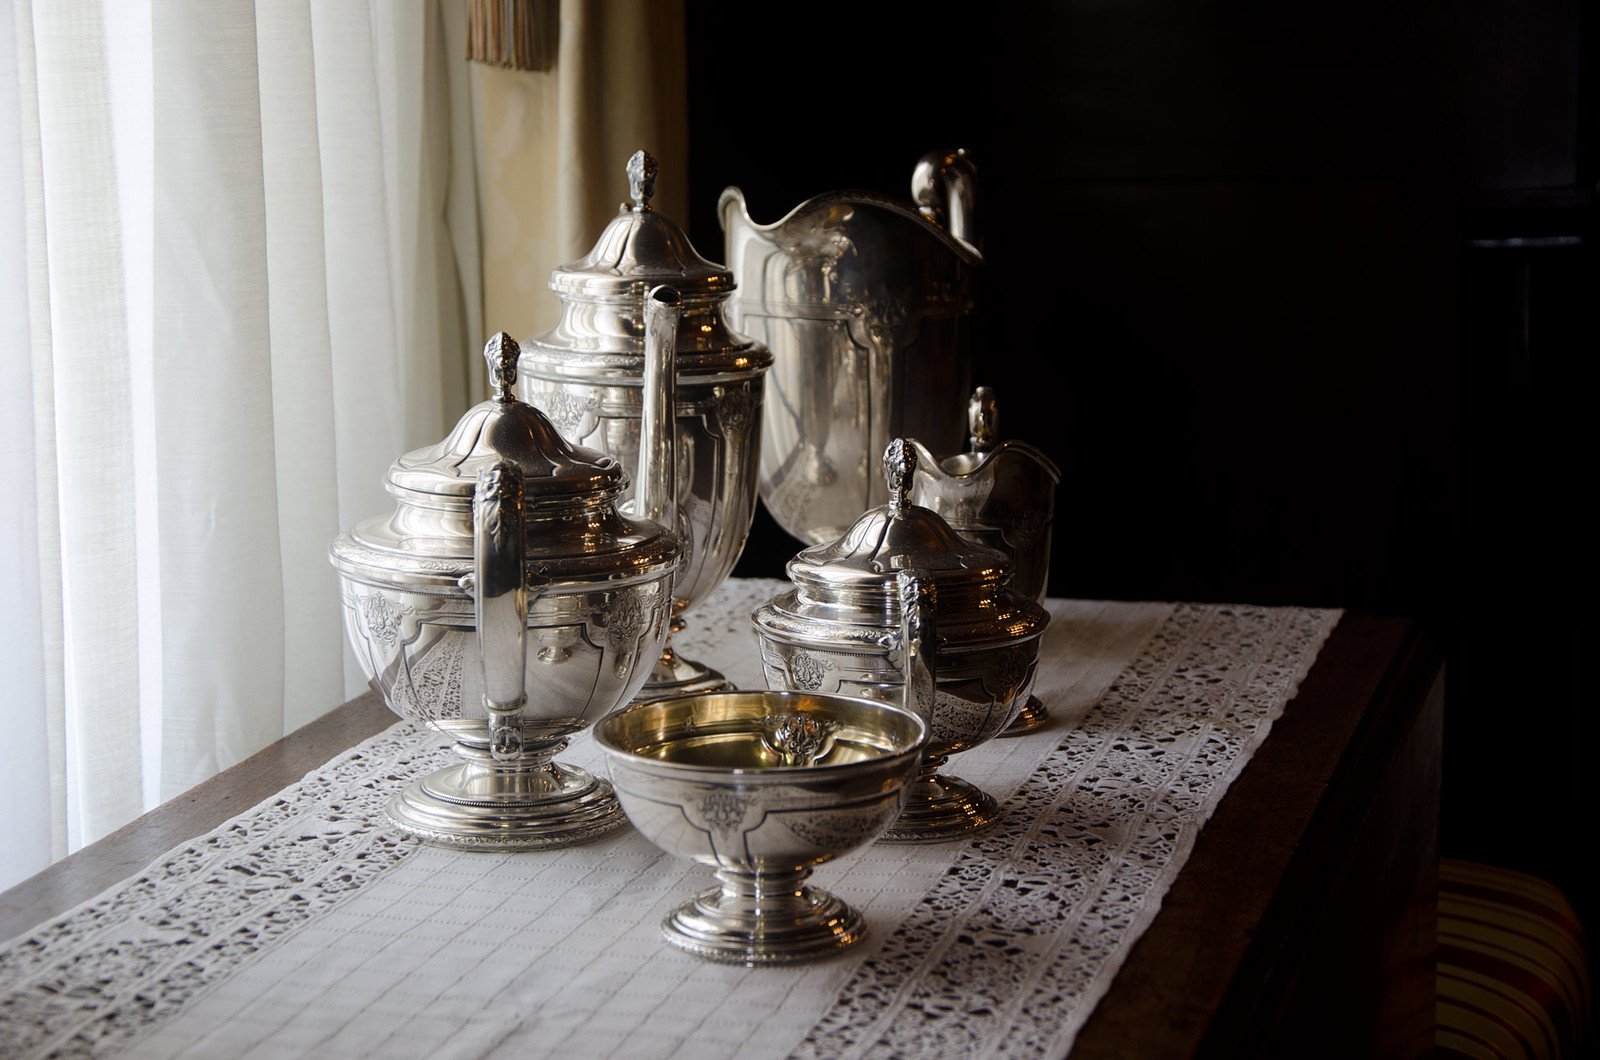 a silver bowl is on top of a lace table cloth